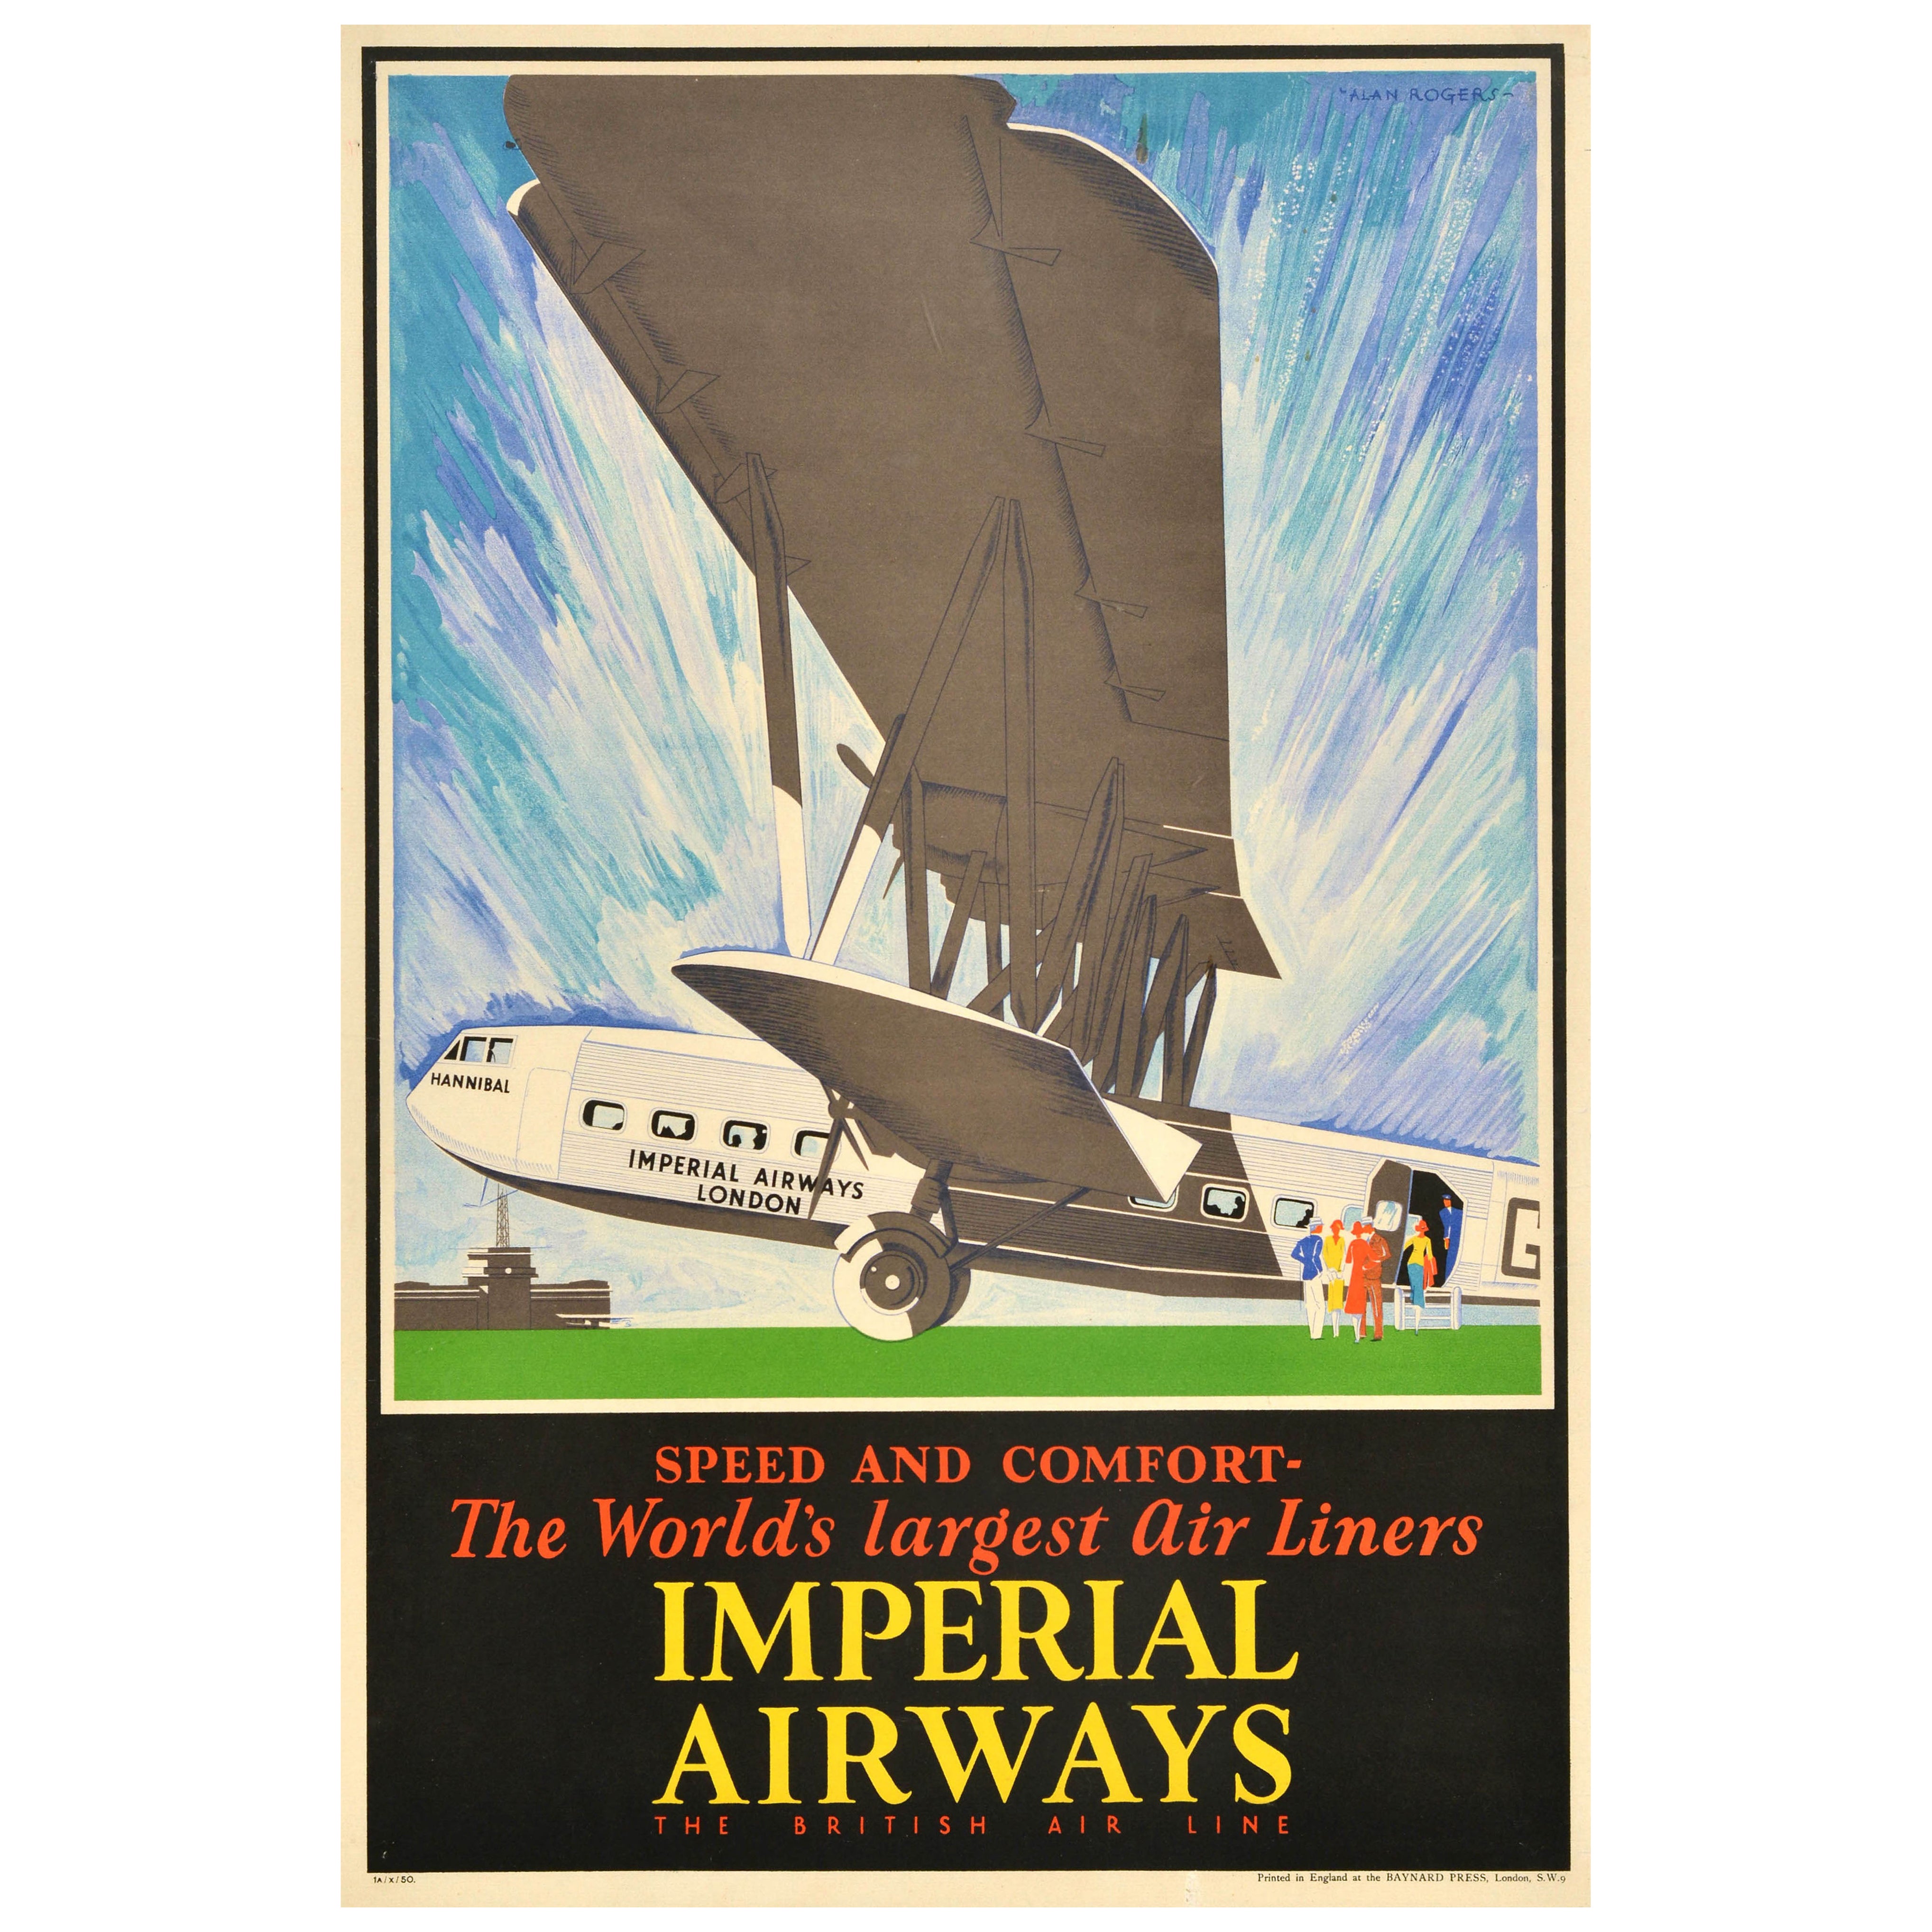 Original Vintage Travel Advertising Poster Imperial Airways Largest Air Liners For Sale